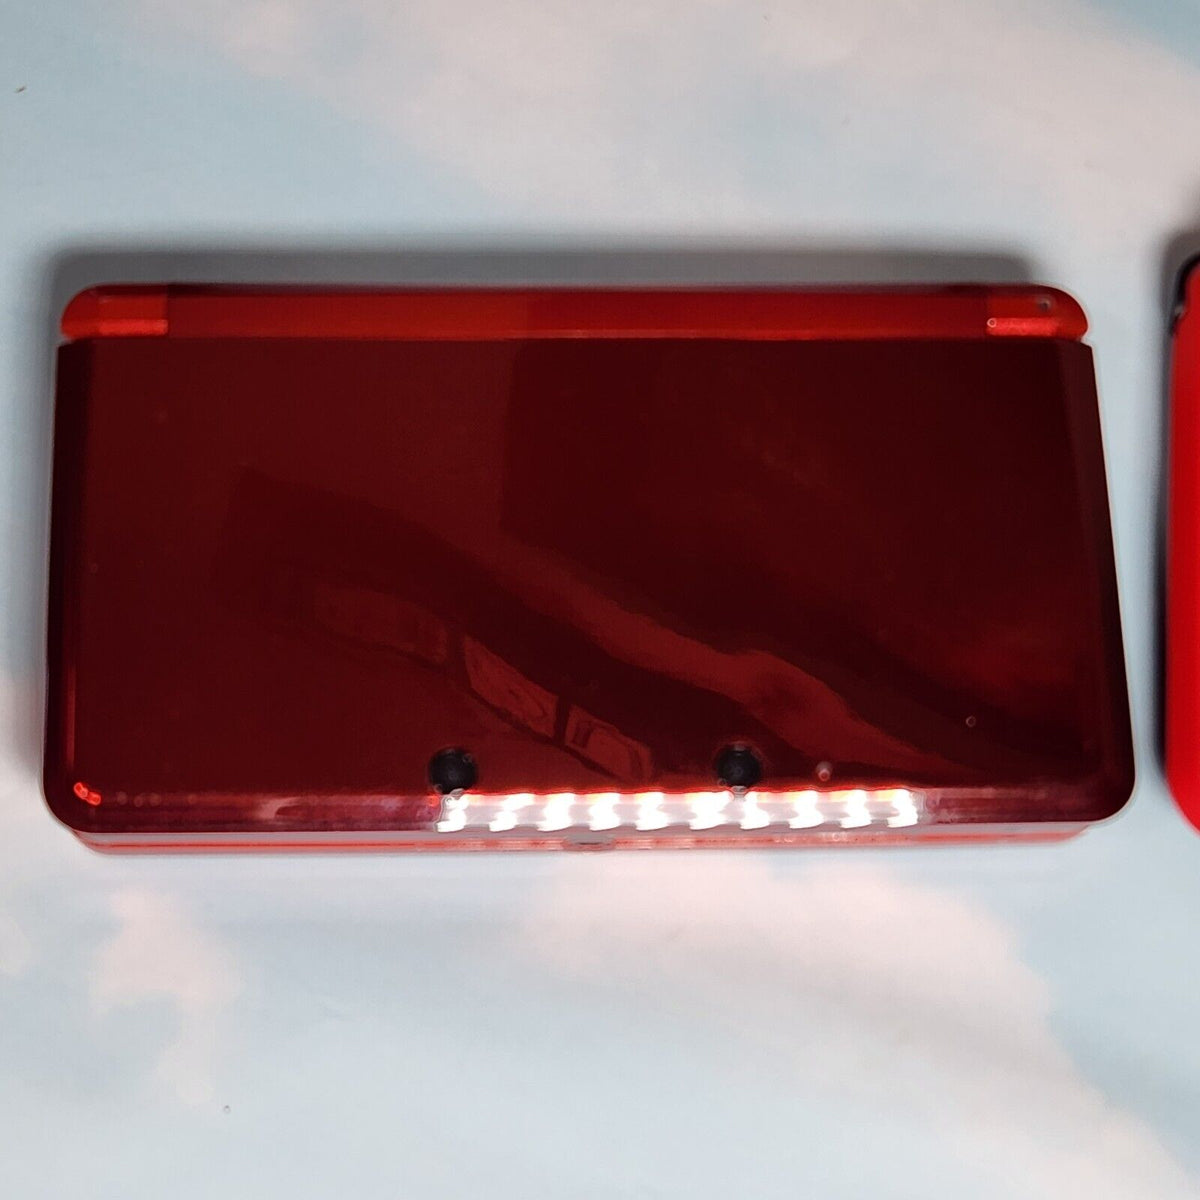 2 Red Nintendo 3DS and Original DS Handheld Consoles OG Japanese only NTSC-J